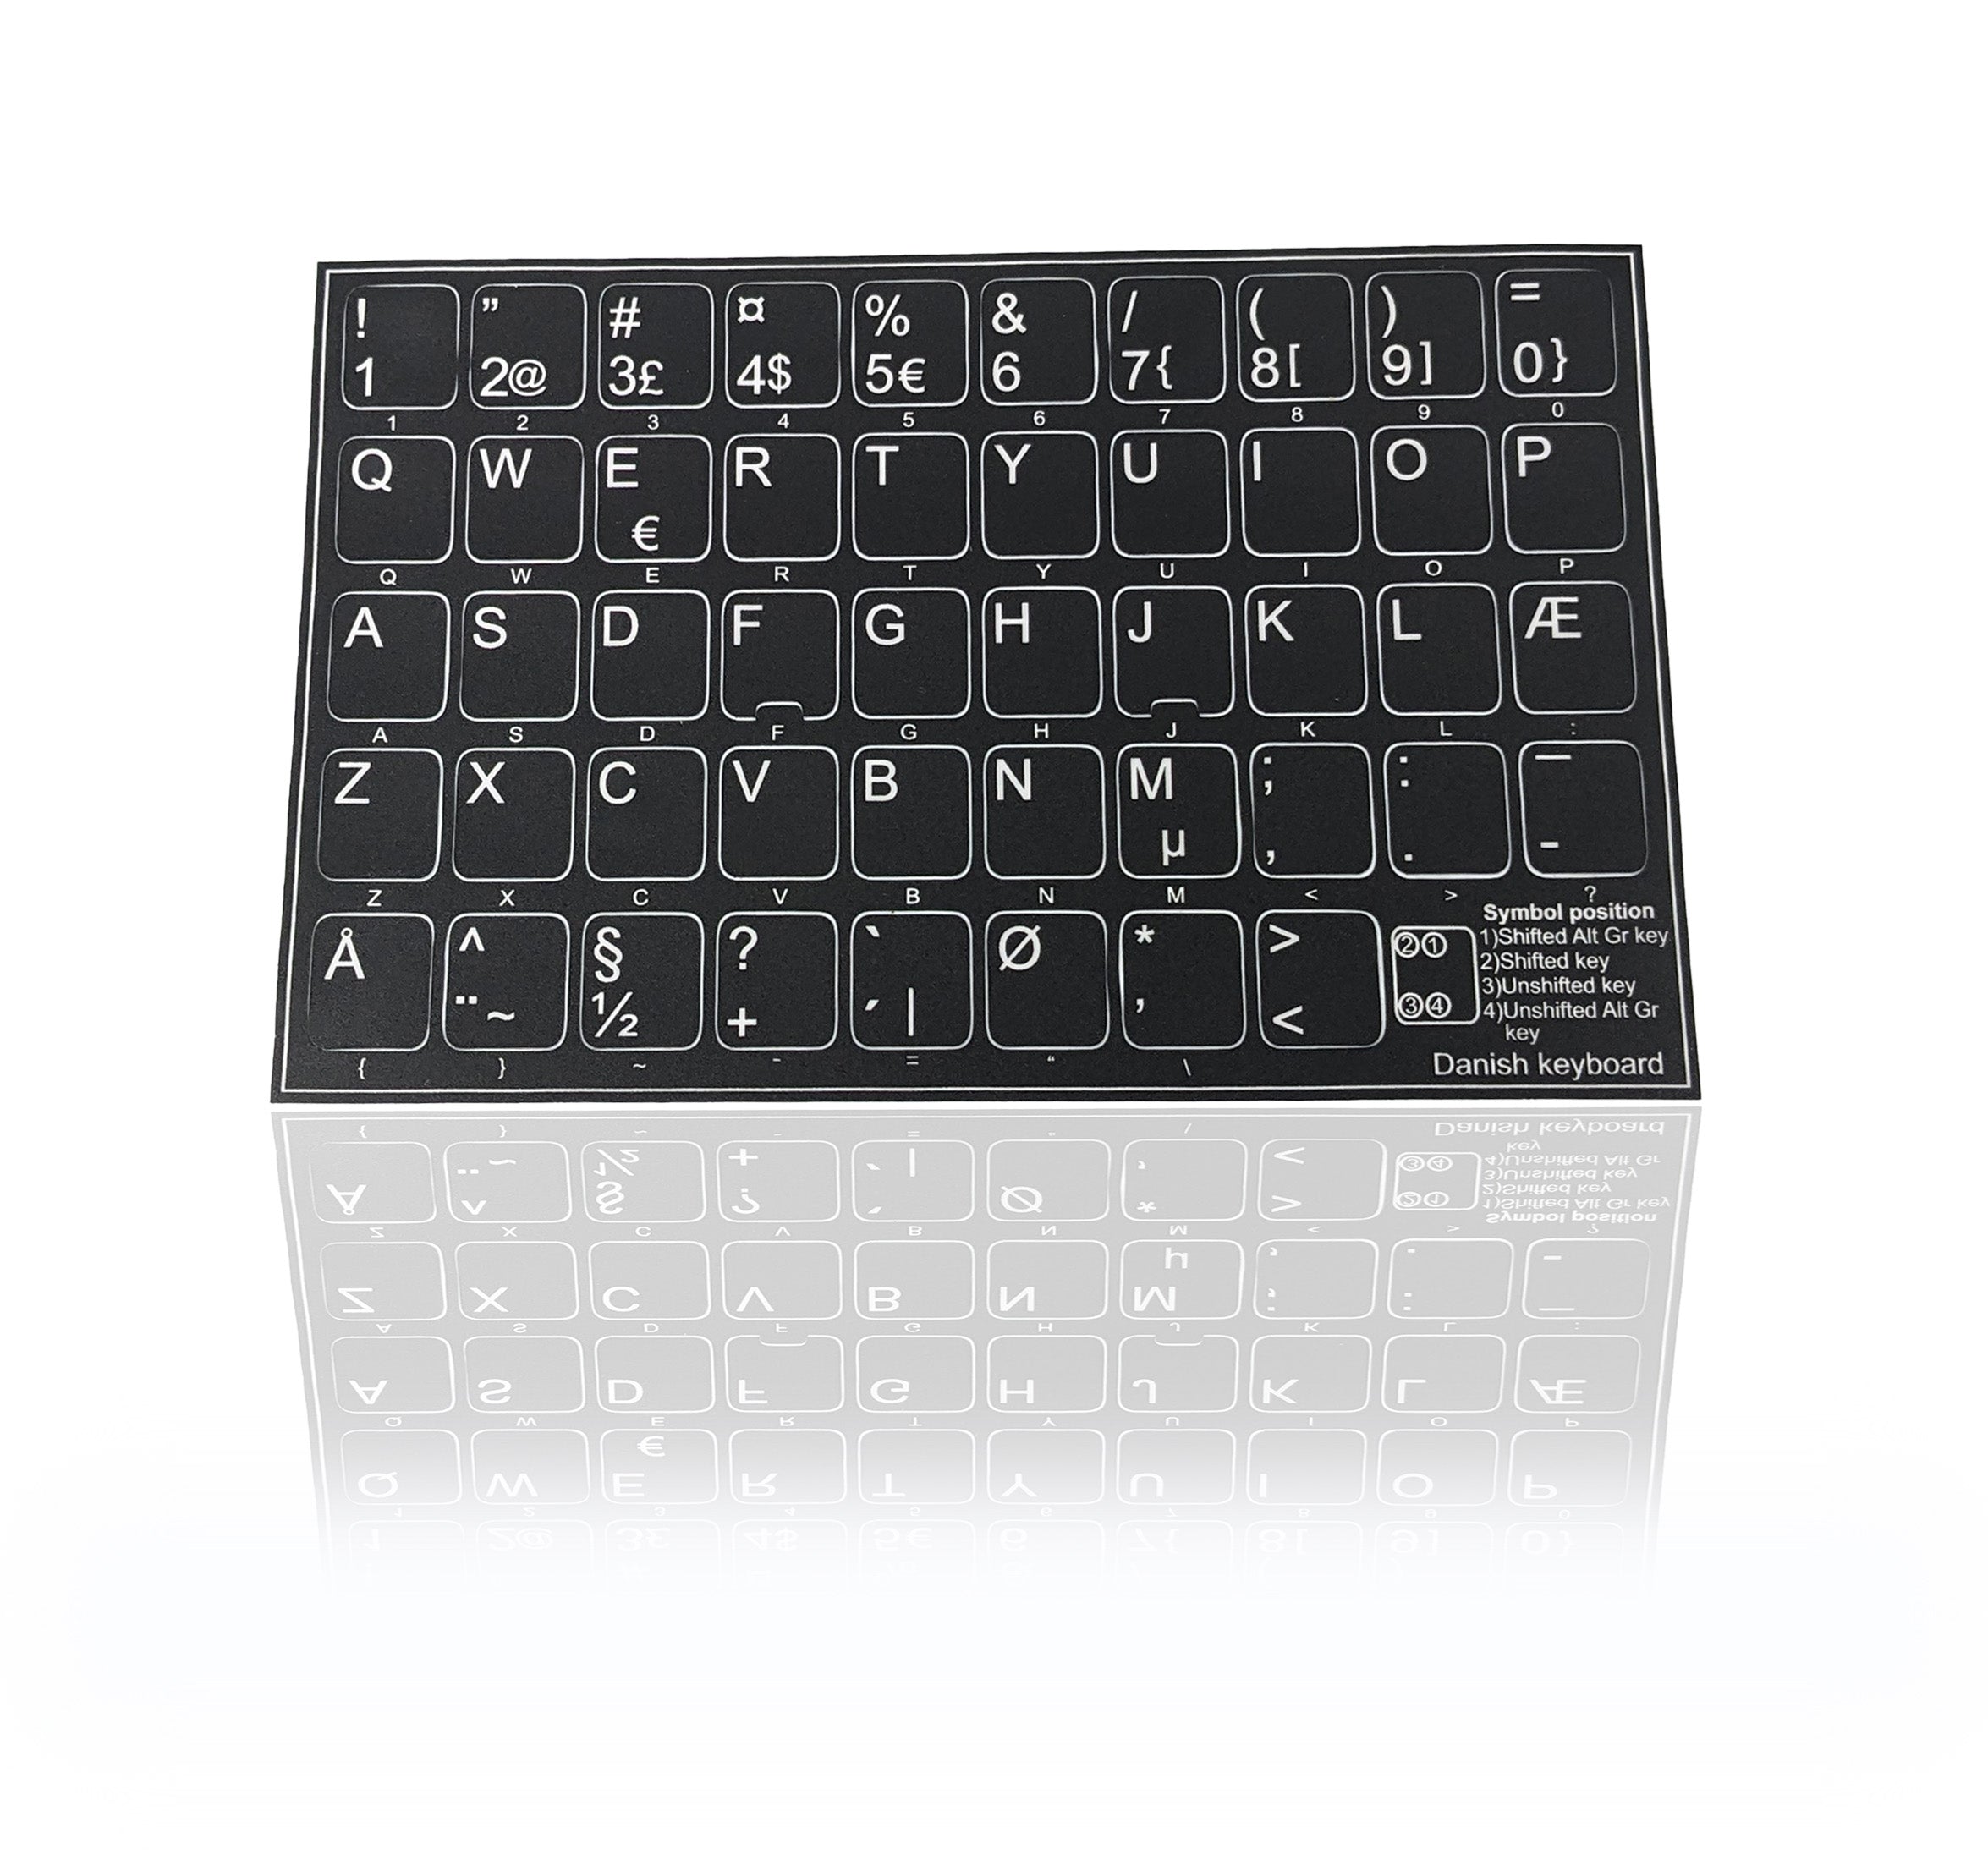 Accuratus Professional Keyboard Stickers - Non Transparent Opaque Labels - Black Background